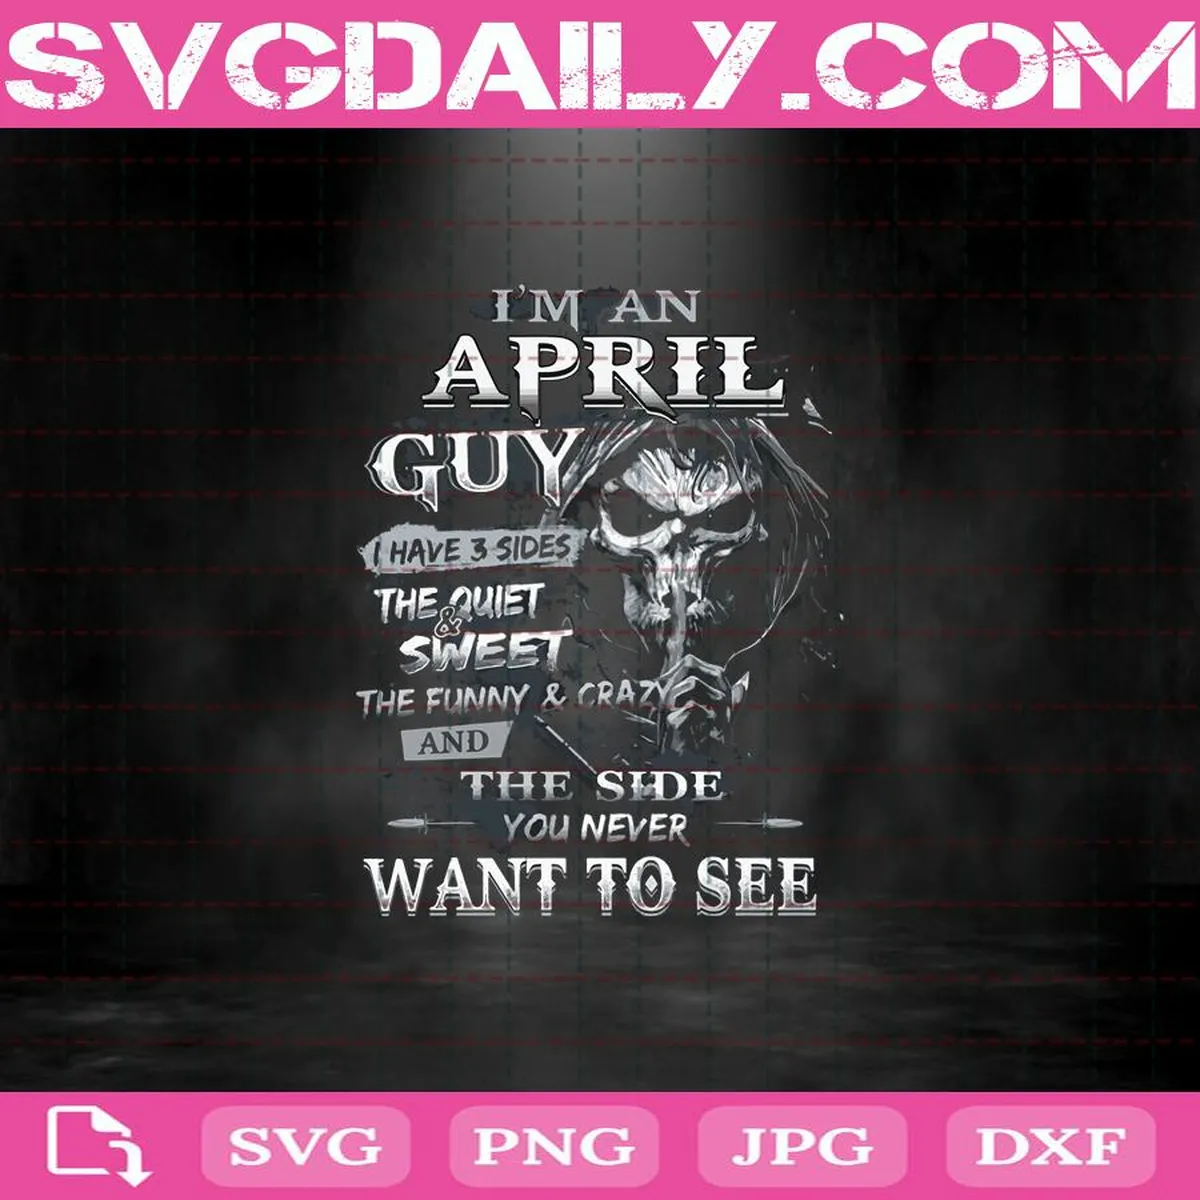 I'm An April Guy Skeleton Svg, I Have 3 Sides Sweet Funny And The Side You Never Want To See Svg, April Guy Svg, April Birthday Svg, Birthday Svg